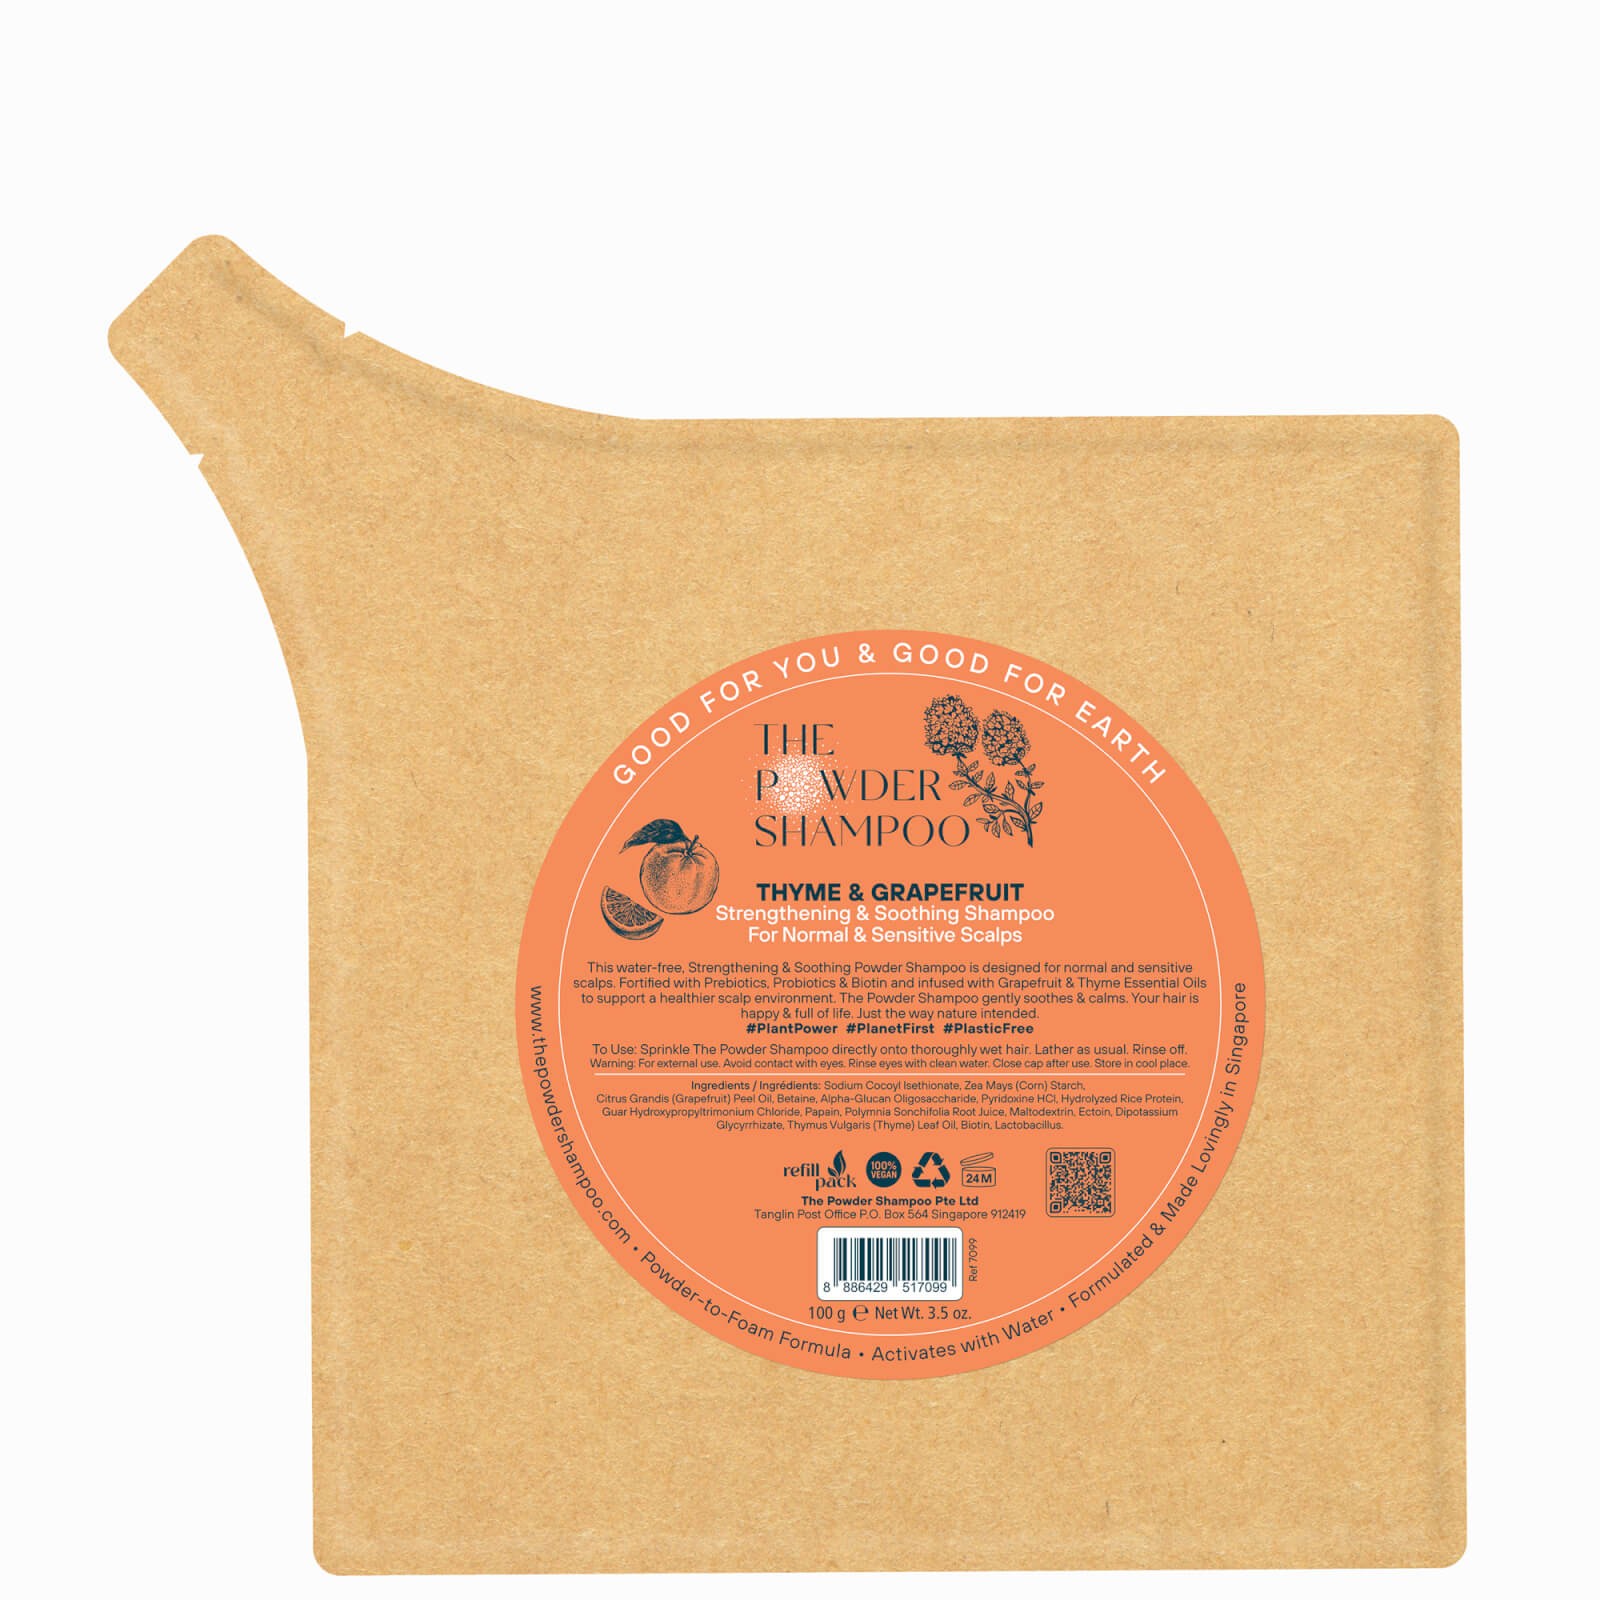 The Powder Shampoo Strengthening & Soothing Shampoo 100g Refill Pack (thyme & Grapefruit) In Neutrals